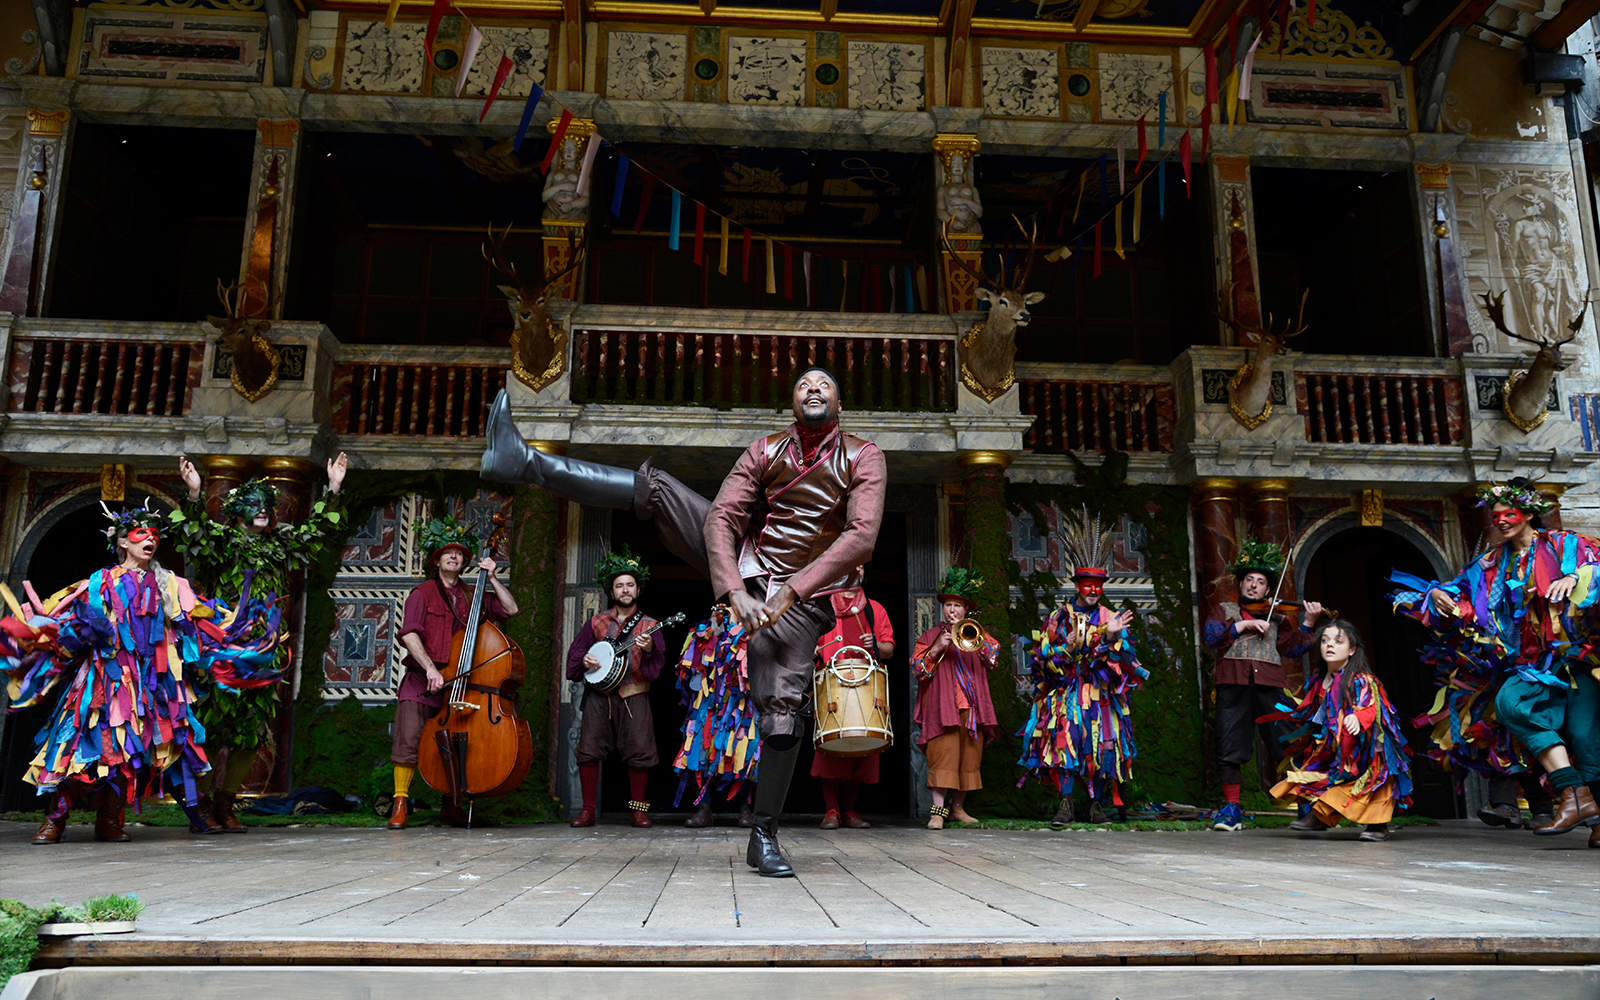 A actor kicks high in the air while others dance around him in colourful costumes